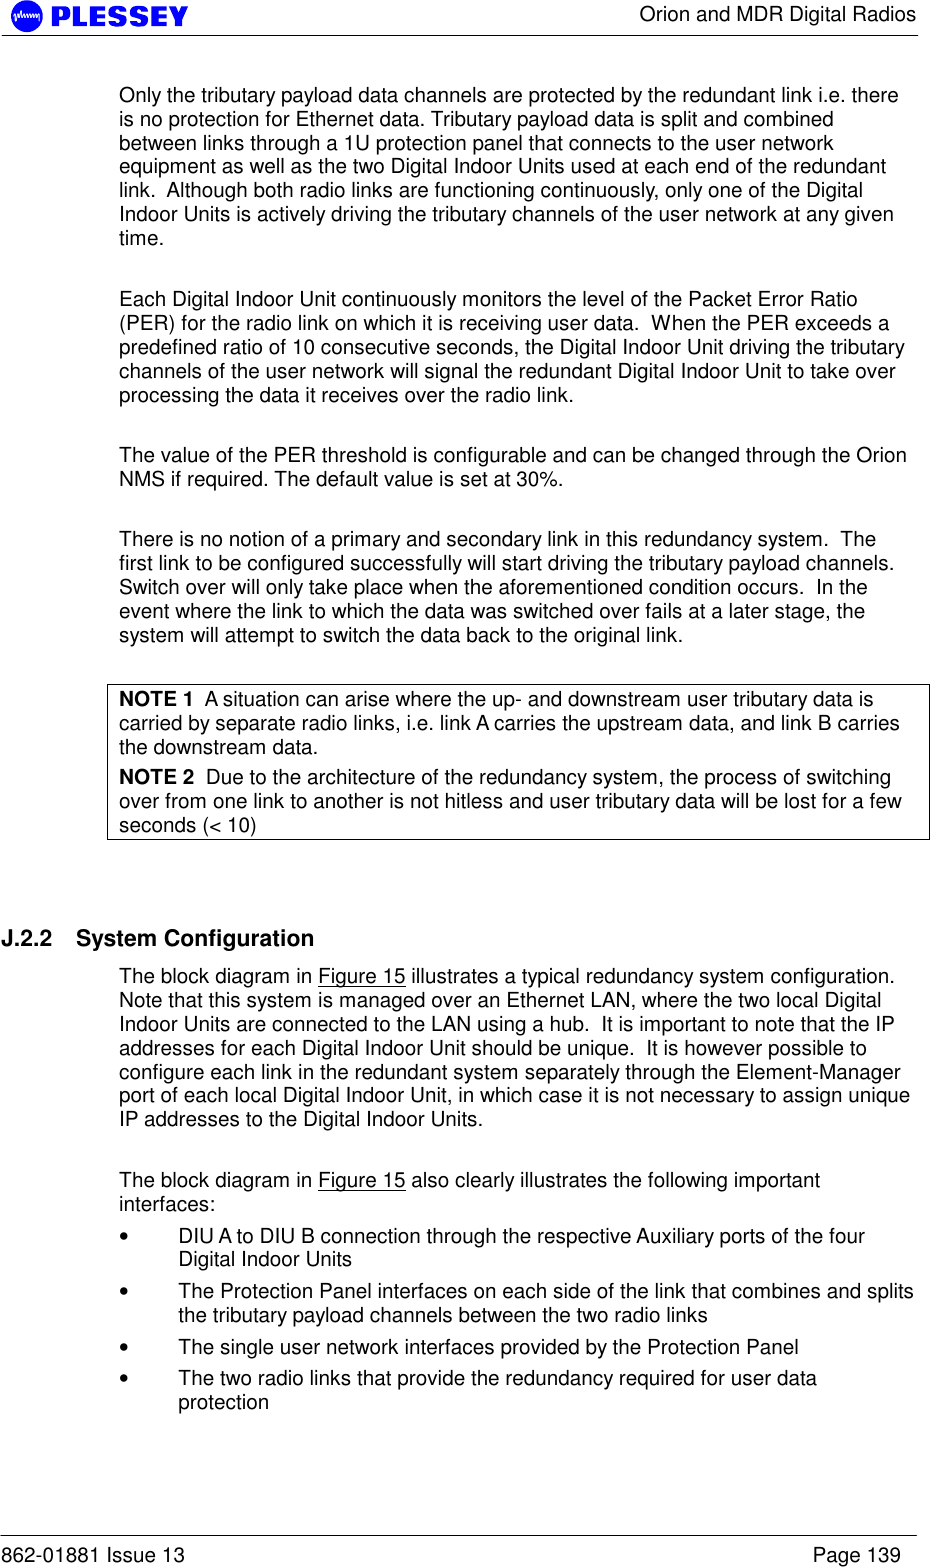      Orion and MDR Digital Radios  862-01881 Issue 13    Page 139 Only the tributary payload data channels are protected by the redundant link i.e. there is no protection for Ethernet data. Tributary payload data is split and combined between links through a 1U protection panel that connects to the user network equipment as well as the two Digital Indoor Units used at each end of the redundant link.  Although both radio links are functioning continuously, only one of the Digital Indoor Units is actively driving the tributary channels of the user network at any given time.  Each Digital Indoor Unit continuously monitors the level of the Packet Error Ratio (PER) for the radio link on which it is receiving user data.  When the PER exceeds a predefined ratio of 10 consecutive seconds, the Digital Indoor Unit driving the tributary channels of the user network will signal the redundant Digital Indoor Unit to take over processing the data it receives over the radio link.  The value of the PER threshold is configurable and can be changed through the Orion NMS if required. The default value is set at 30%.  There is no notion of a primary and secondary link in this redundancy system.  The first link to be configured successfully will start driving the tributary payload channels.  Switch over will only take place when the aforementioned condition occurs.  In the event where the link to which the data was switched over fails at a later stage, the system will attempt to switch the data back to the original link.  NOTE 1  A situation can arise where the up- and downstream user tributary data is carried by separate radio links, i.e. link A carries the upstream data, and link B carries the downstream data. NOTE 2  Due to the architecture of the redundancy system, the process of switching over from one link to another is not hitless and user tributary data will be lost for a few seconds (&lt; 10)  J.2.2 System Configuration The block diagram in Figure 15 illustrates a typical redundancy system configuration.  Note that this system is managed over an Ethernet LAN, where the two local Digital Indoor Units are connected to the LAN using a hub.  It is important to note that the IP addresses for each Digital Indoor Unit should be unique.  It is however possible to configure each link in the redundant system separately through the Element-Manager port of each local Digital Indoor Unit, in which case it is not necessary to assign unique IP addresses to the Digital Indoor Units.  The block diagram in Figure 15 also clearly illustrates the following important interfaces: • DIU A to DIU B connection through the respective Auxiliary ports of the four Digital Indoor Units • The Protection Panel interfaces on each side of the link that combines and splits the tributary payload channels between the two radio links • The single user network interfaces provided by the Protection Panel • The two radio links that provide the redundancy required for user data protection 